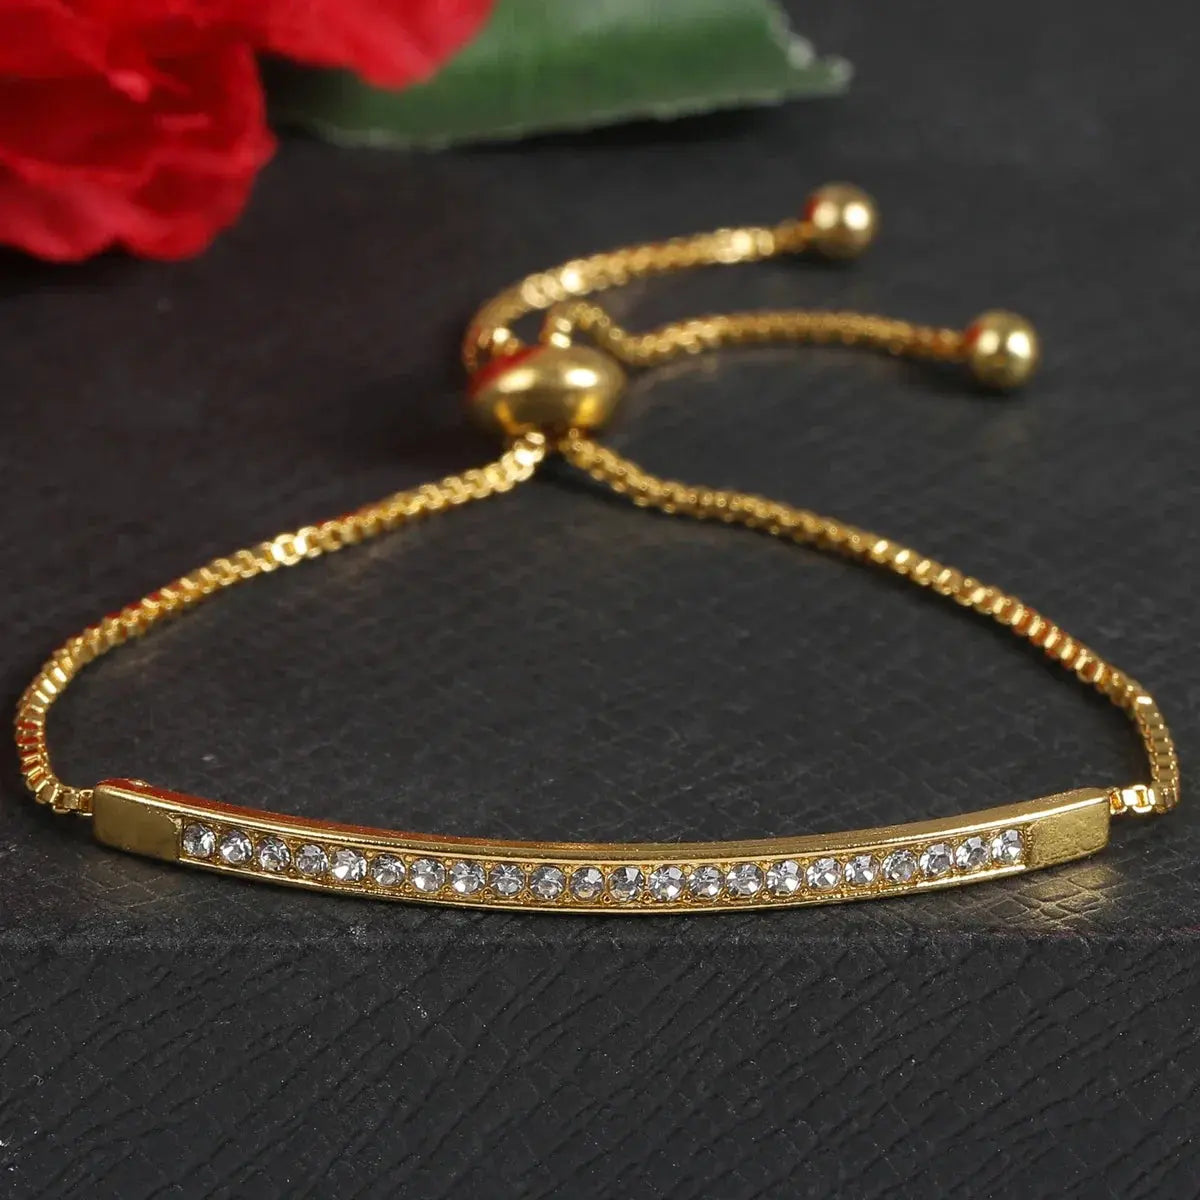 gold bracelet with rhinestones on a gray background